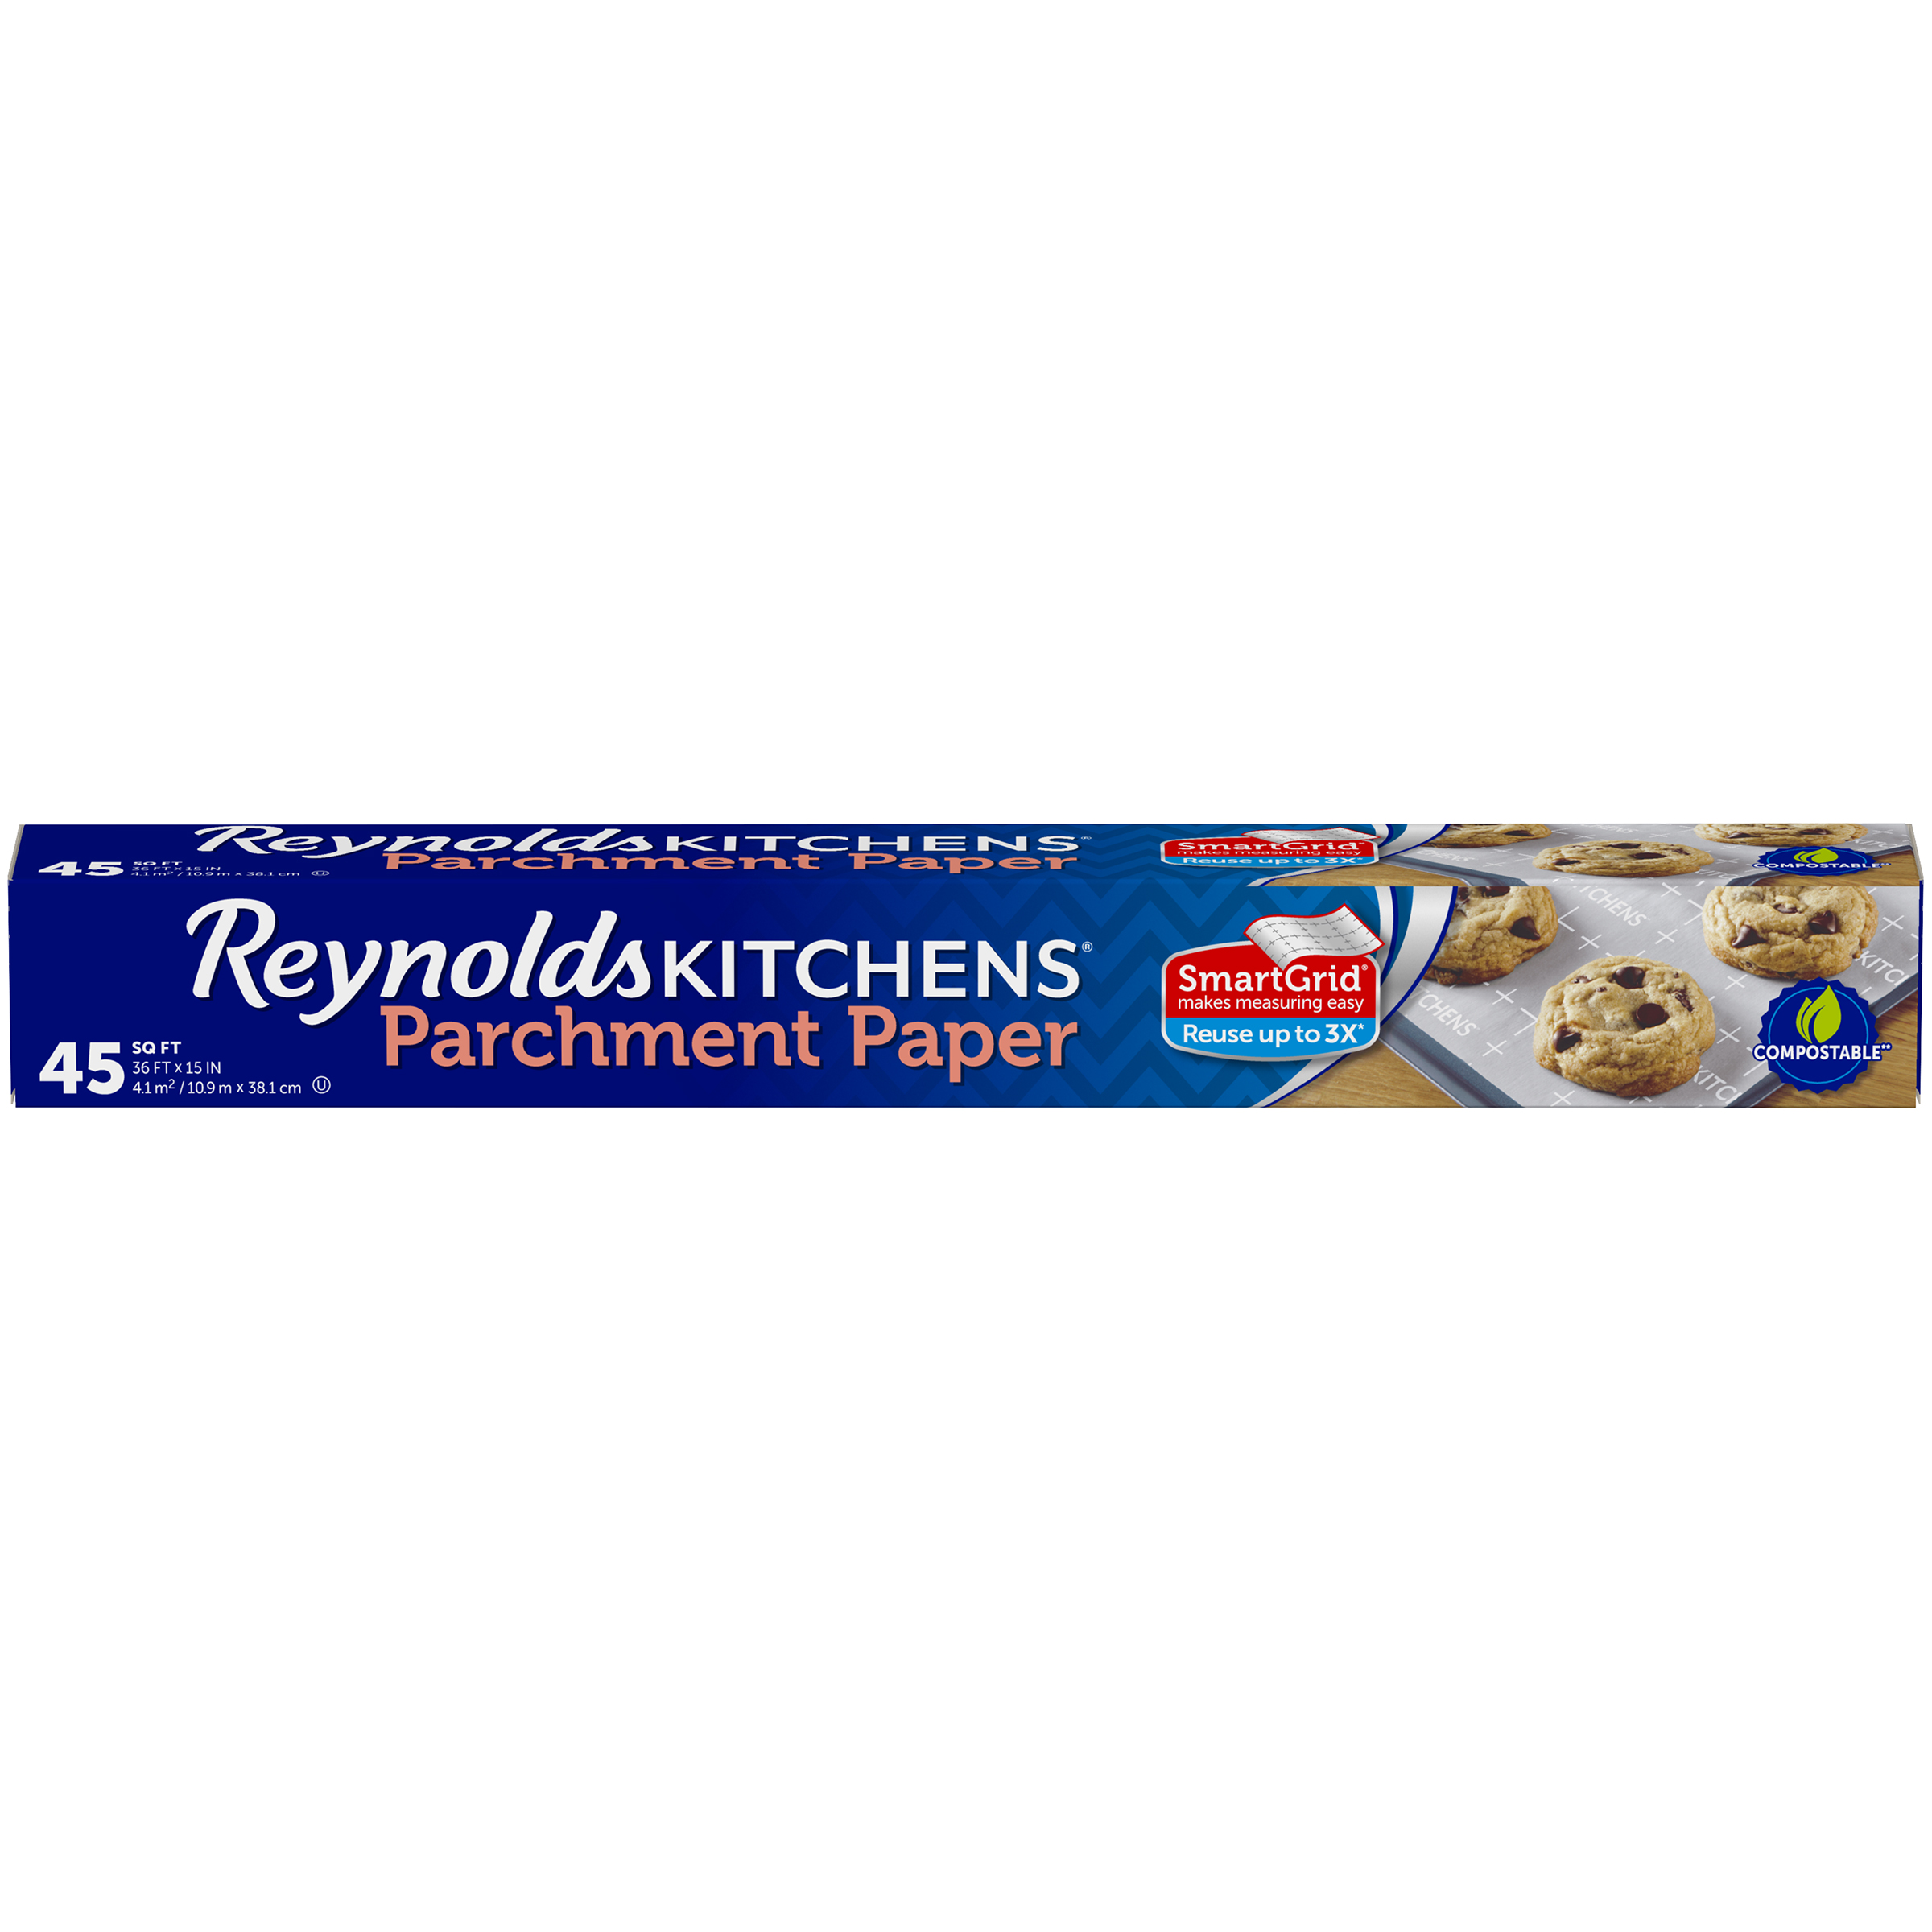 Reynolds Kitchens Parchment Paper (SmartGrid, Non-Stick, 45 Square Foot Roll) - image 1 of 2